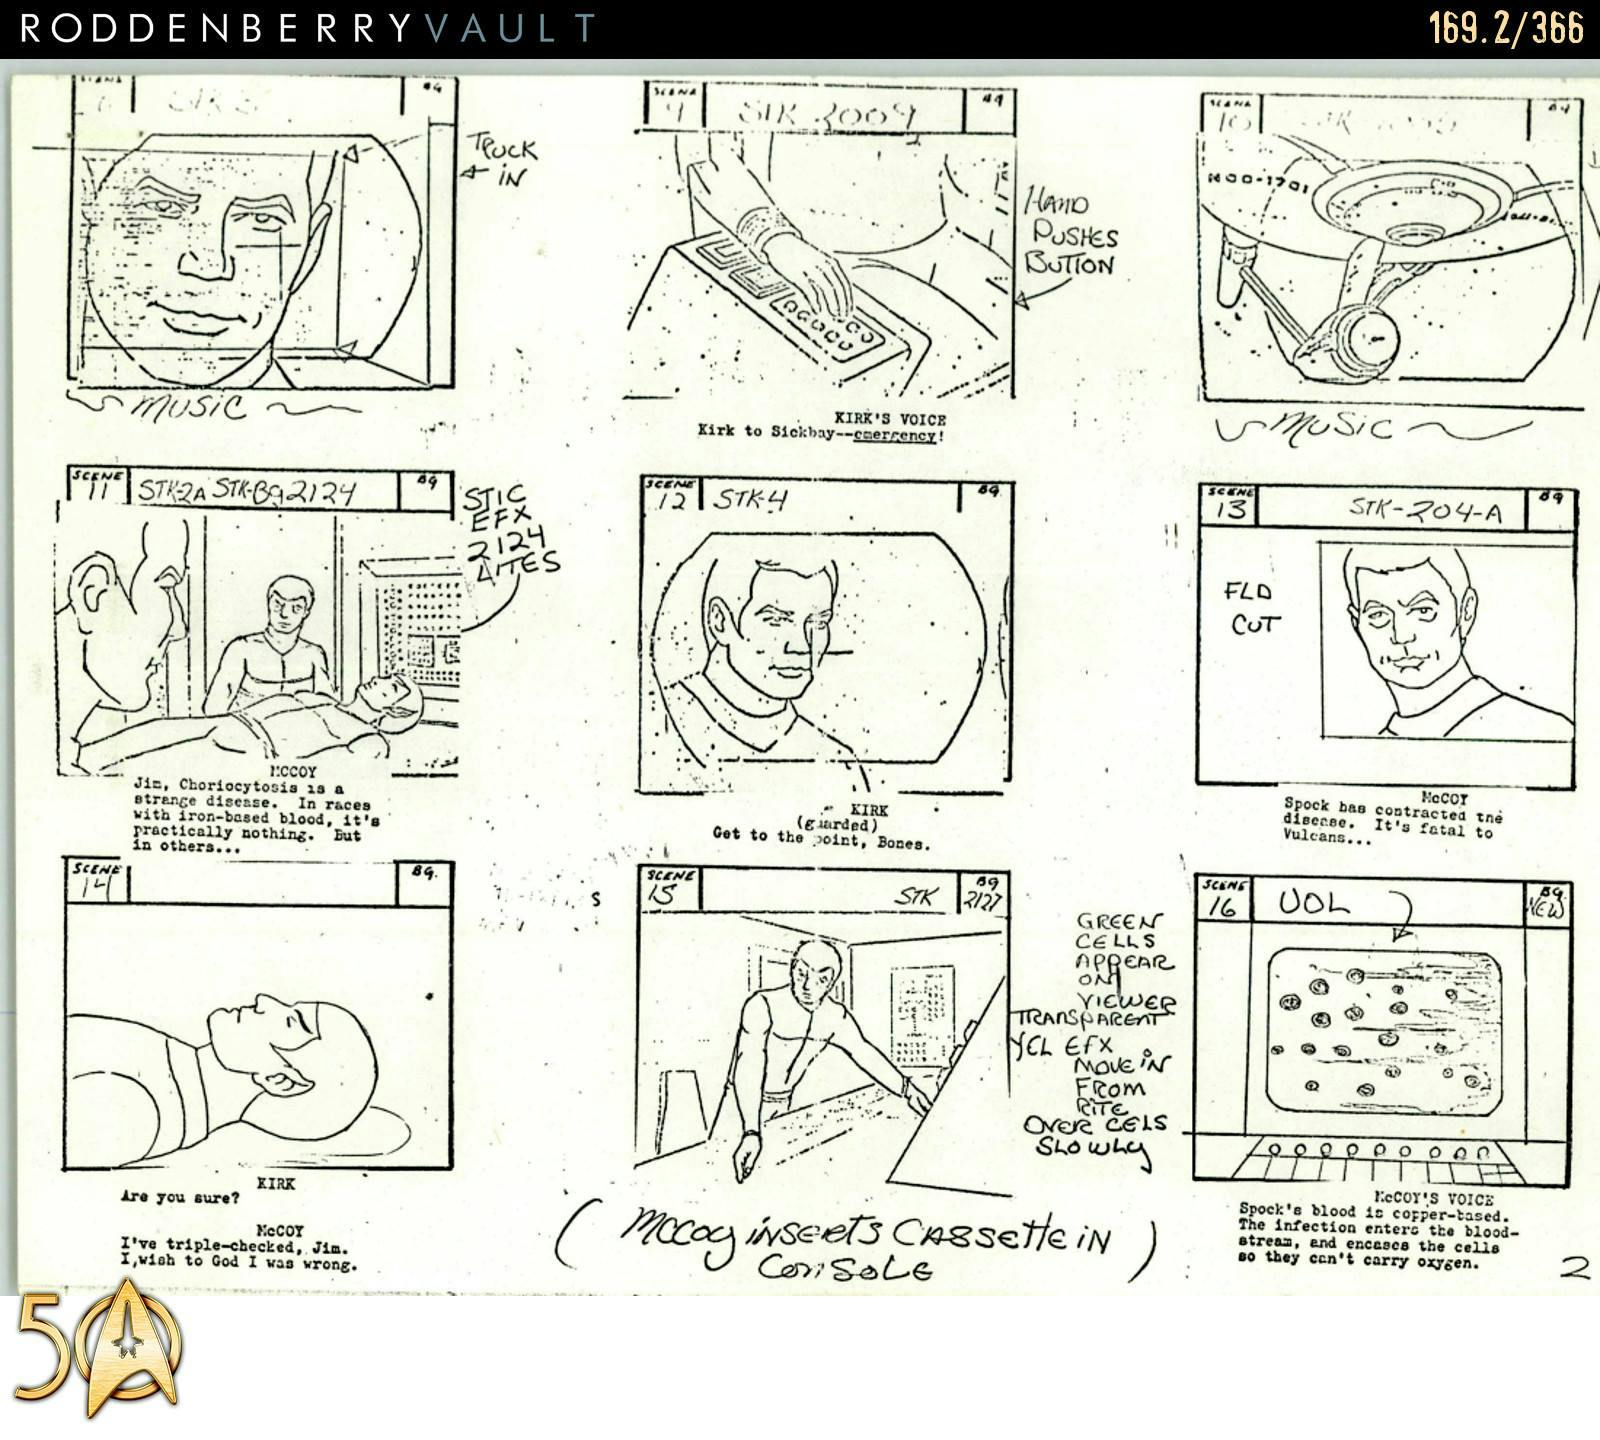 From the Roddenberry 366 Vault - The Animated Series - 'The Pirates of Orion' storyboards